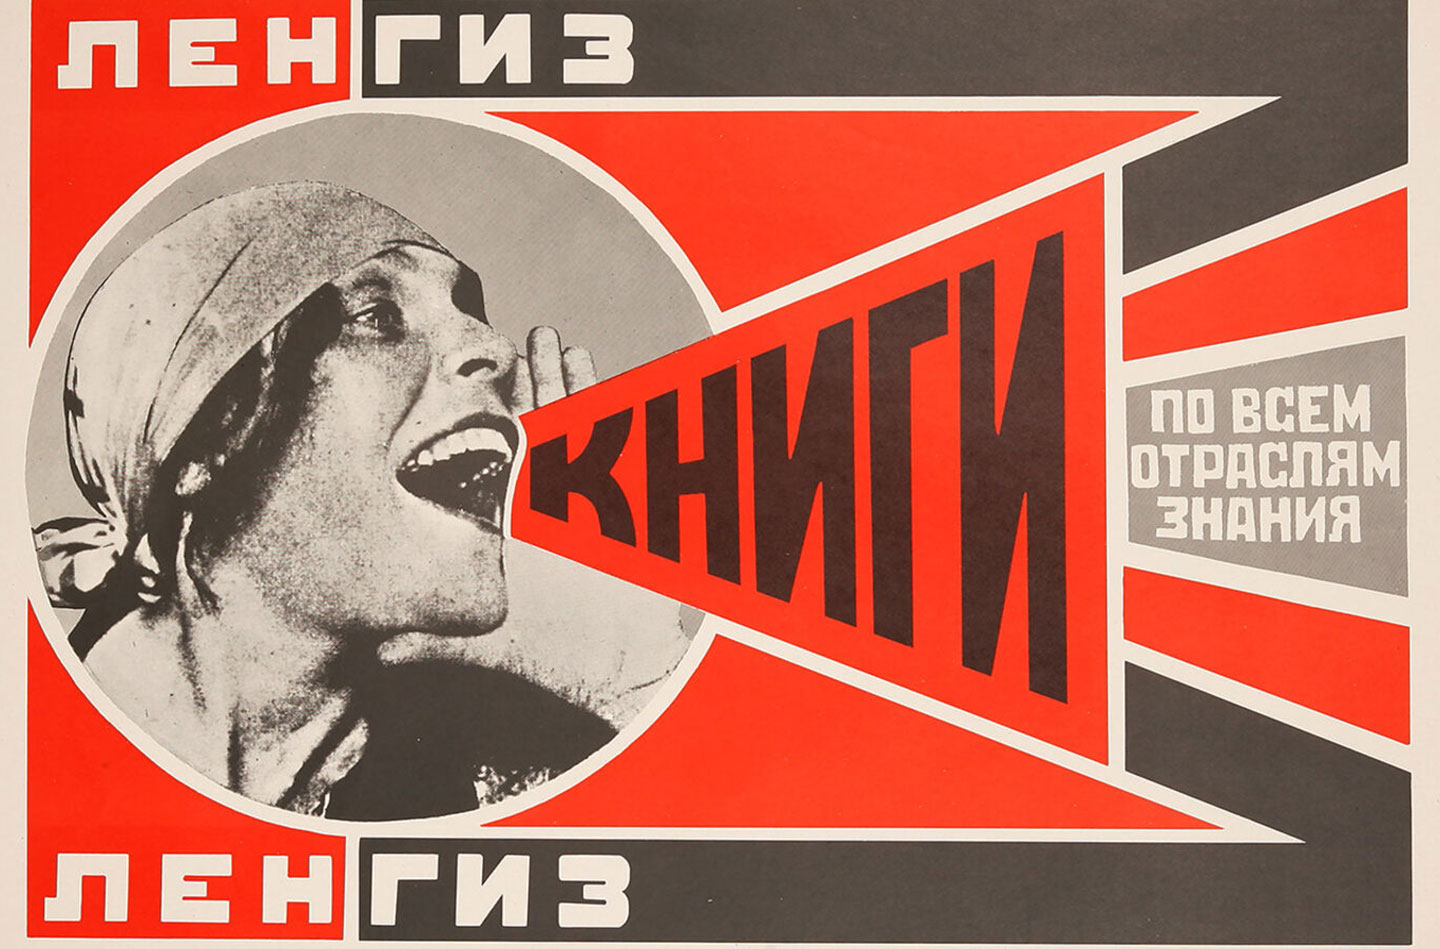 "Books (Please)! In All Branches of Knowledge," by Aleksandr Rodchenko, 1924